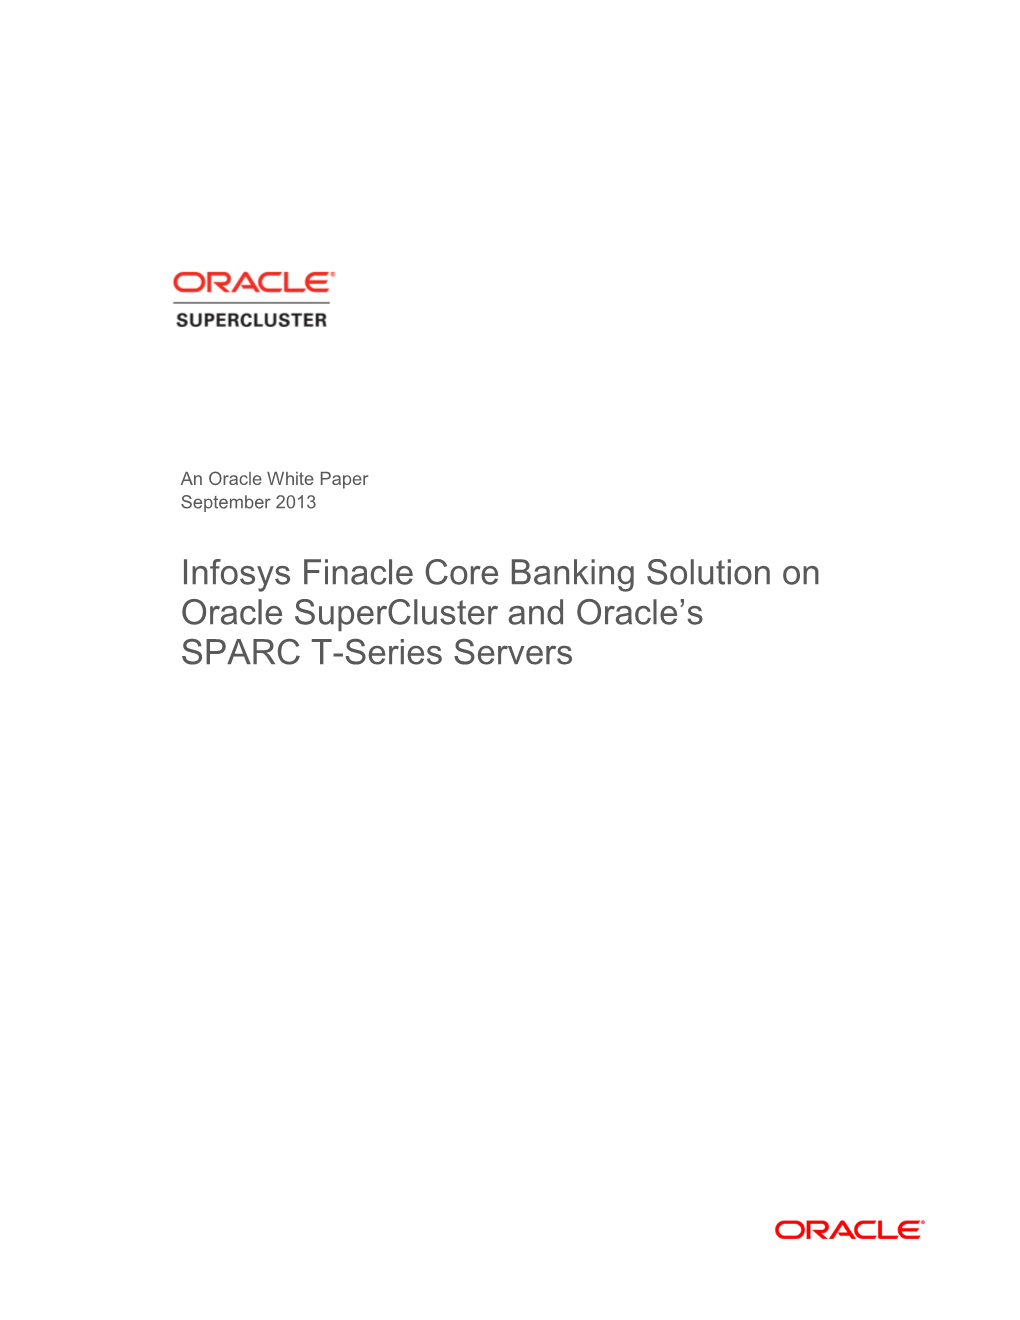 Infosys Finacle Core Banking Solution on Oracle Supercluster and Oracle’S SPARC T-Series Servers